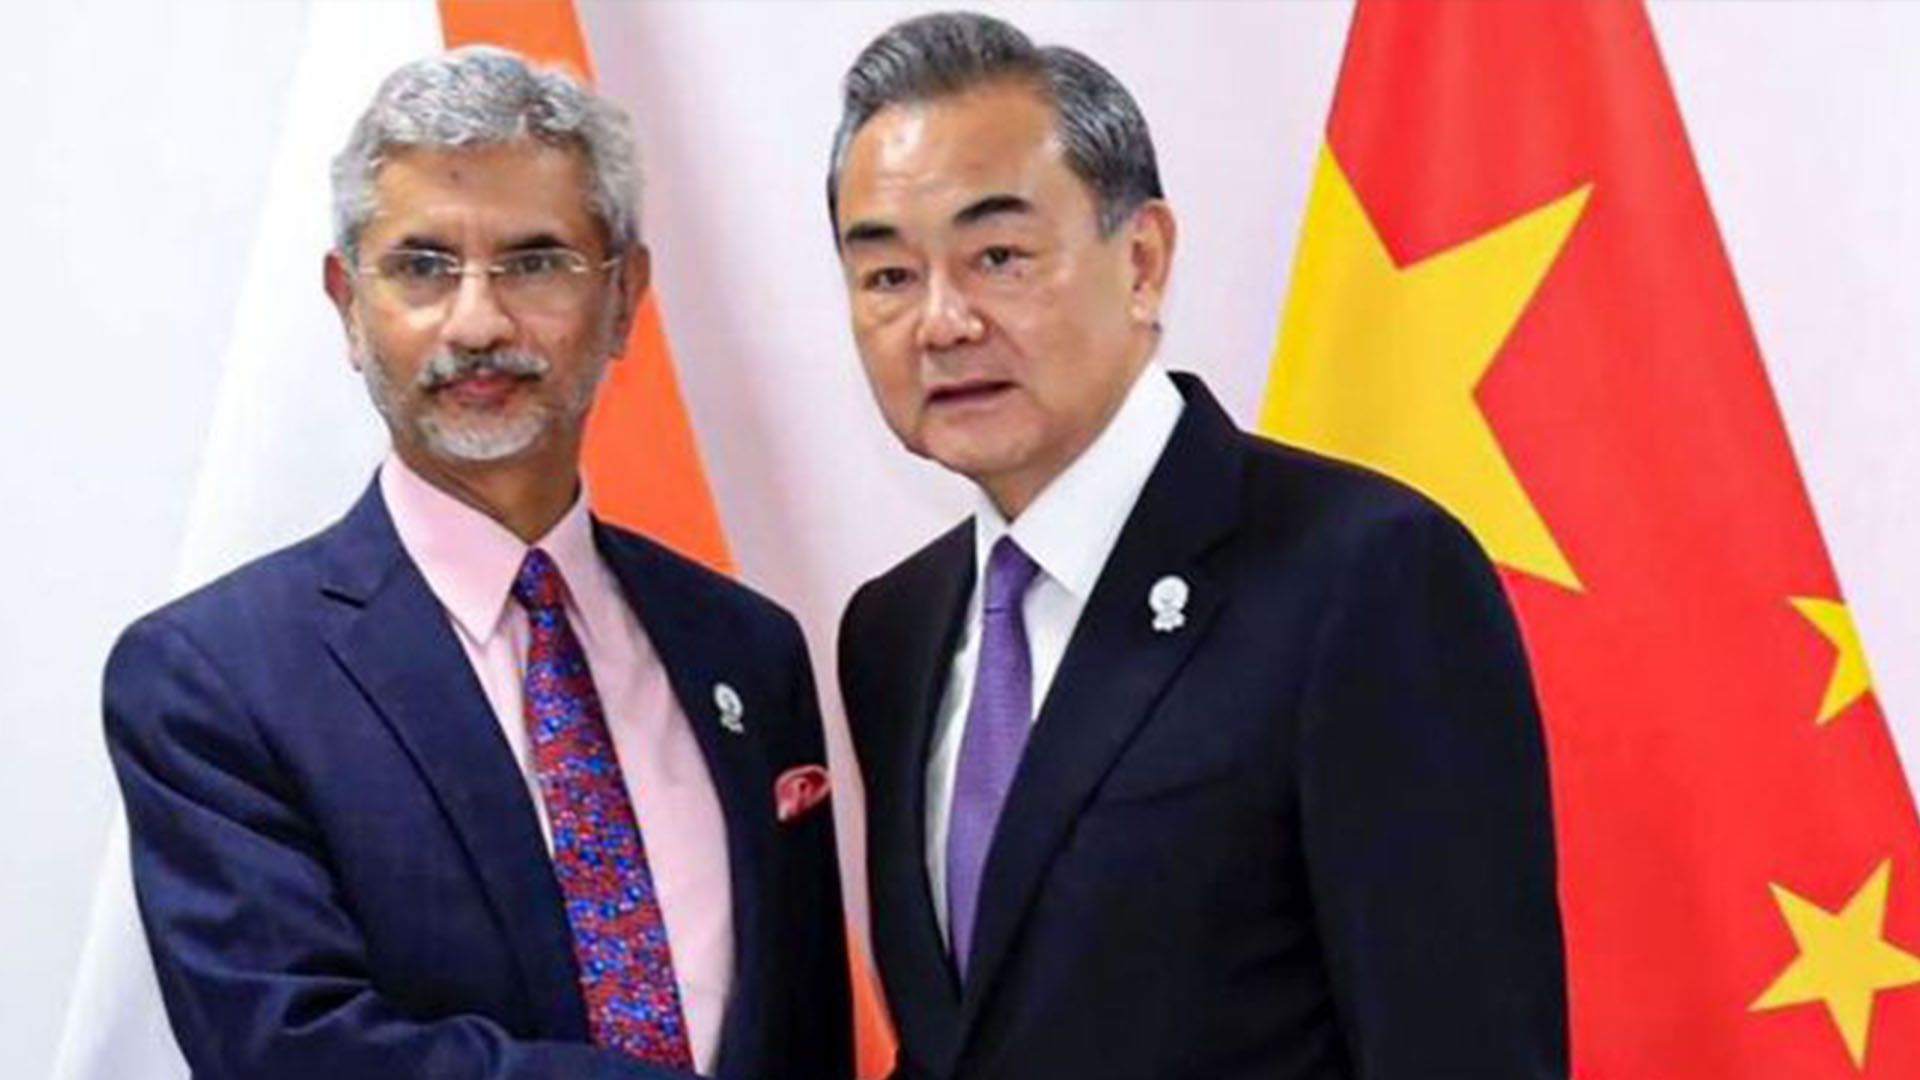 China, India agree to disengage troops on contested border